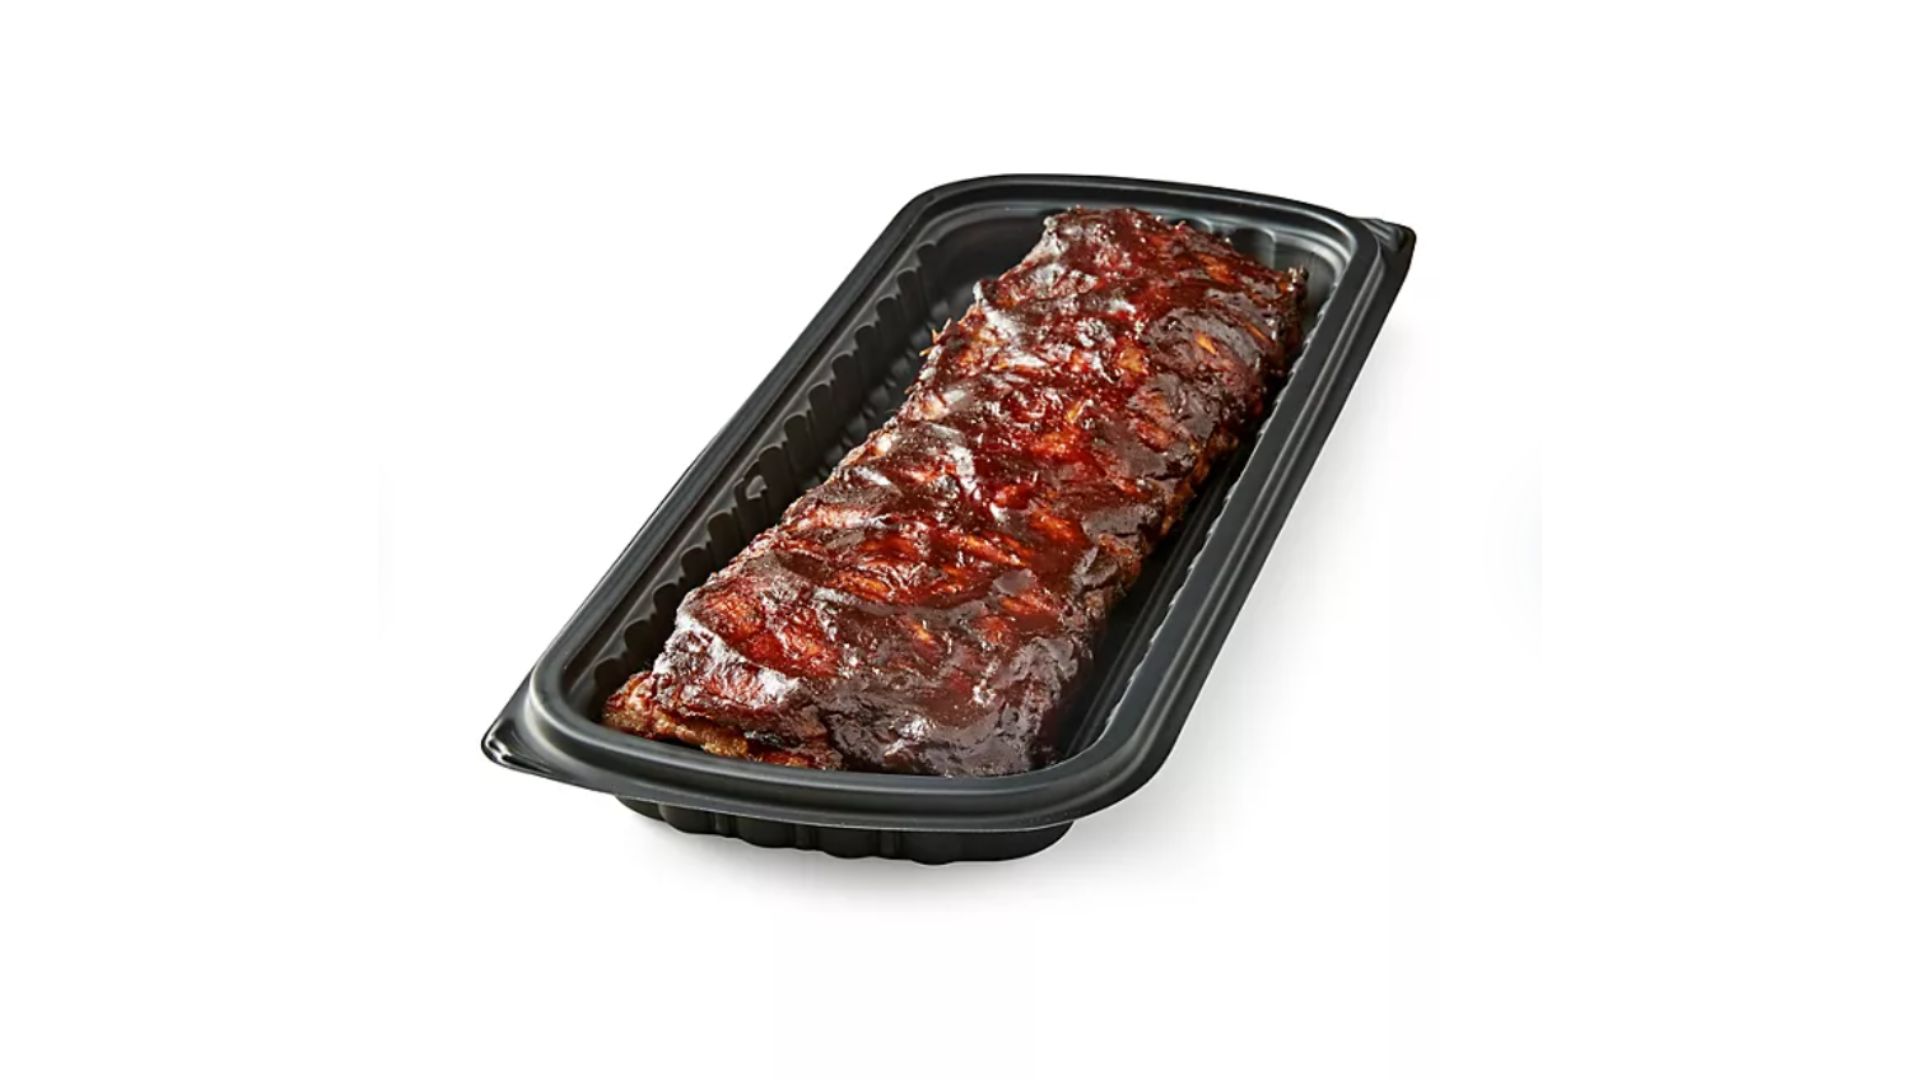 <ul> <li><strong>Price:</strong> <a href="https://www.samsclub.com/p/members-mark-rotisserie-baby-back-ribs/P03006360" rel="noreferrer noopener">$12.98</a></li> </ul> <p>Many Sam's Club-prepared foods are big hits with customers. The Member's Mark rotisserie baby back ribs, with 200 one-star reviews, is less than a crowd-pleaser. Commonly cited complaints included the meat being too dry, overcooked and tough to eat.</p> <p><strong>For You: <a href="https://www.gobankingrates.com/saving-money/shopping/best-20-dollars-you-can-spend-dollar-tree-according-to-superfans/?utm_term=related_link_6&utm_campaign=1266949&utm_source=msn.com&utm_content=8&utm_medium=rss" rel="">The Best $20 You Can Spend at Dollar Tree, According to Superfans</a></strong></p>